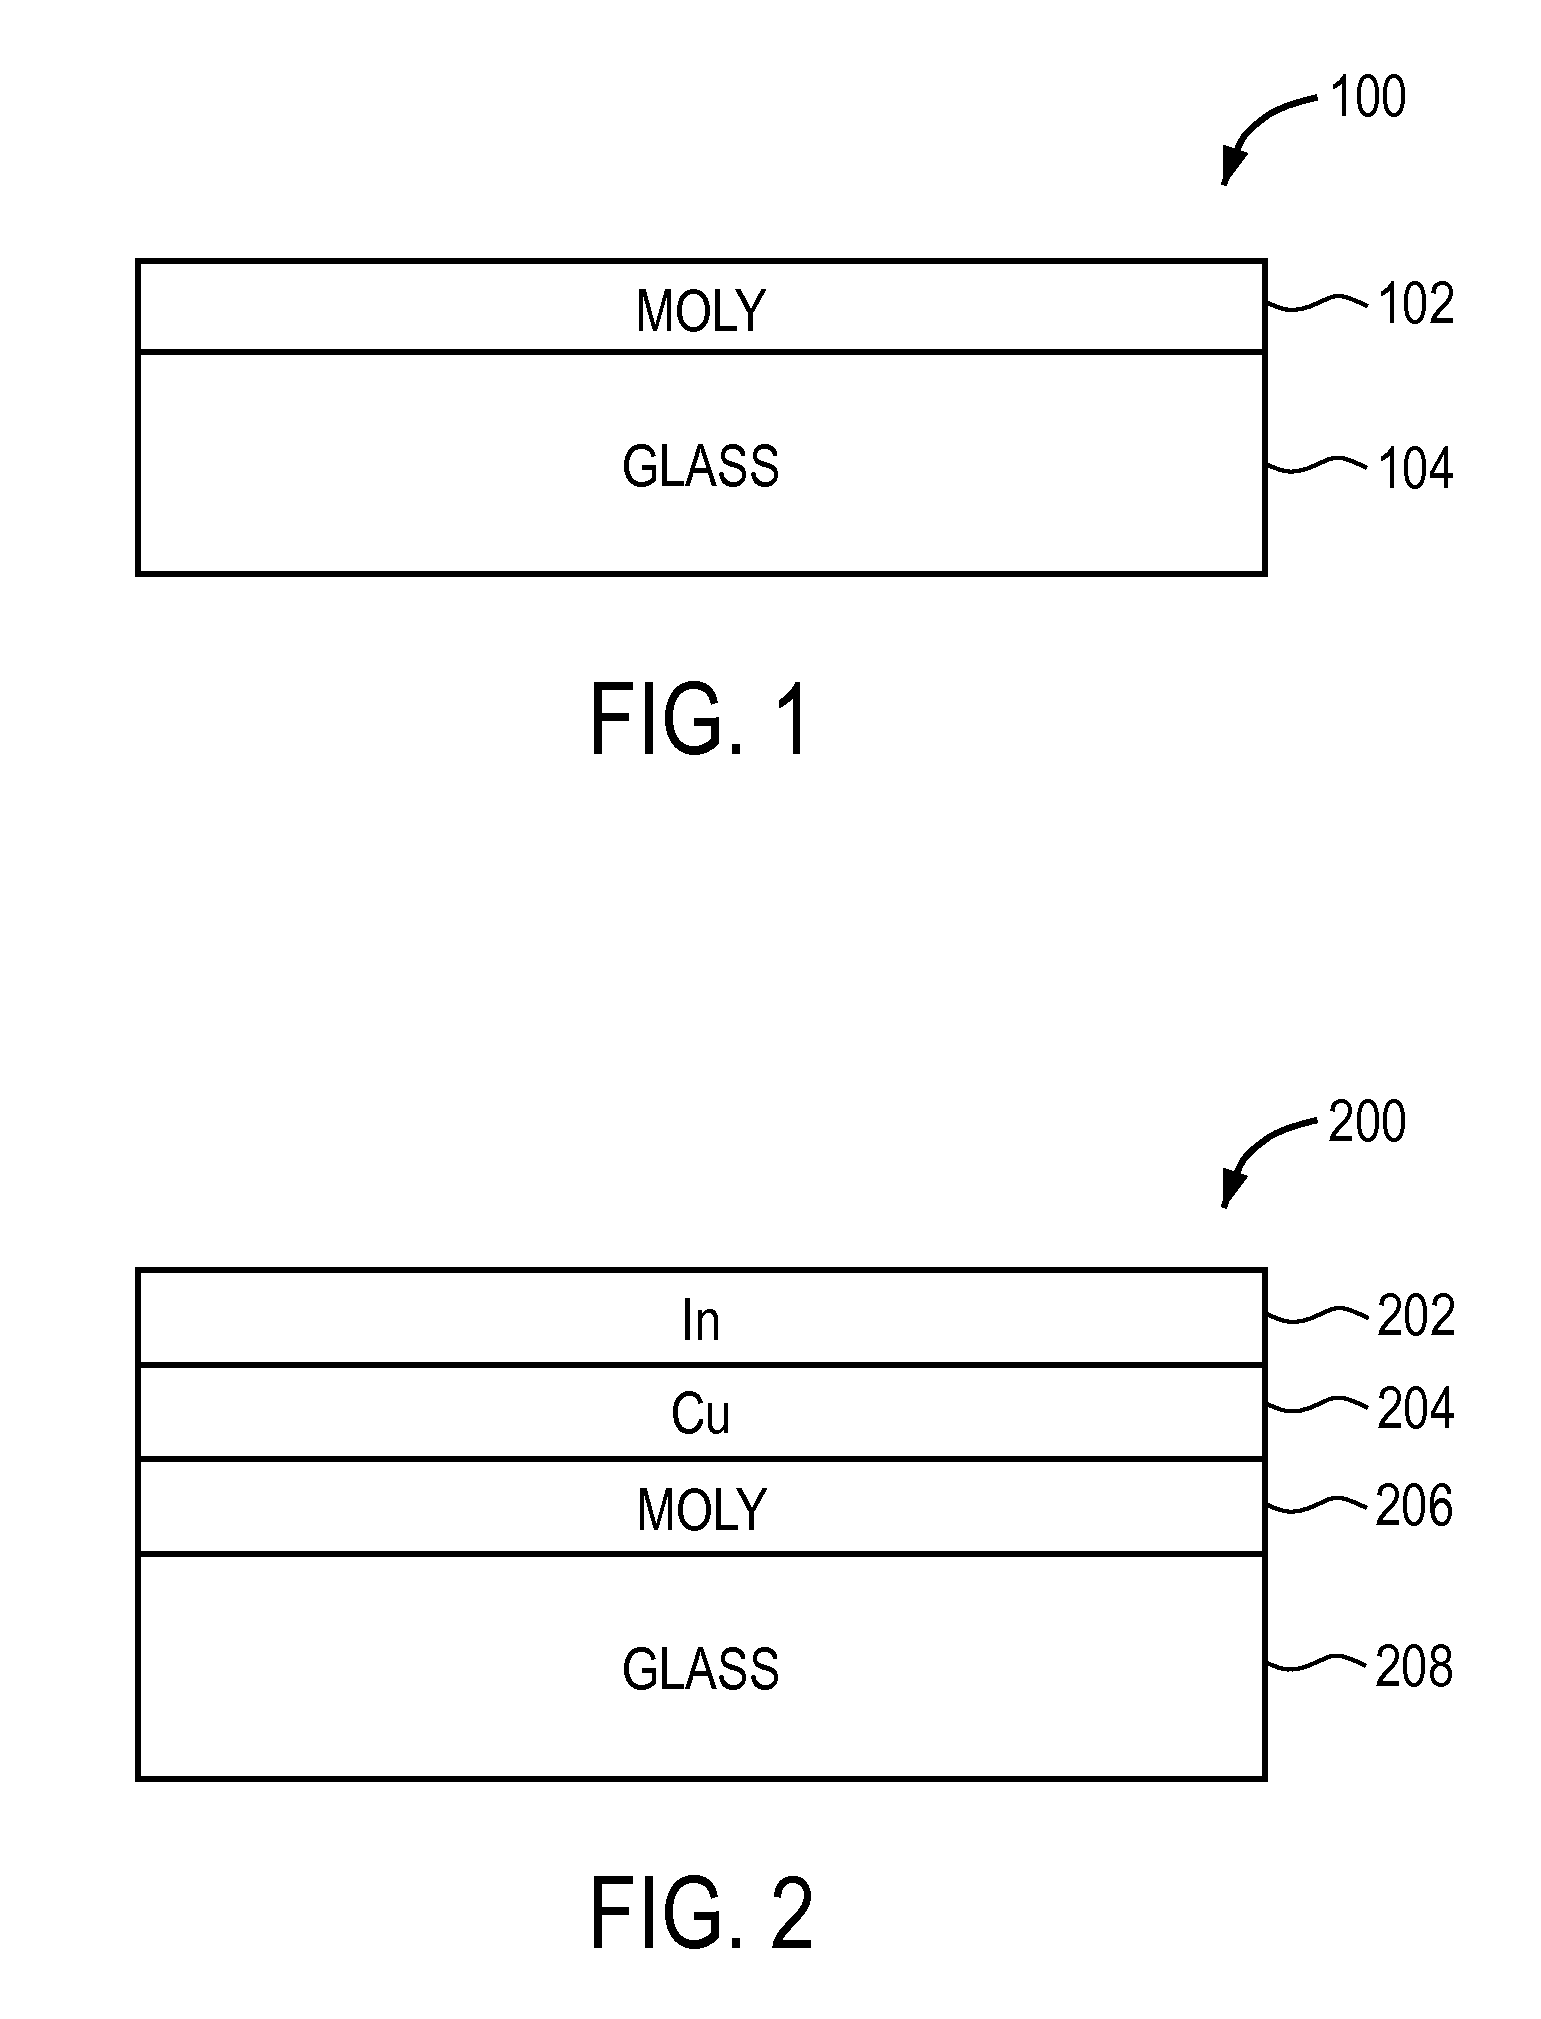 Thermal management and method for large scale processing of CIS and/or CIGS based thin films overlying glass substrates